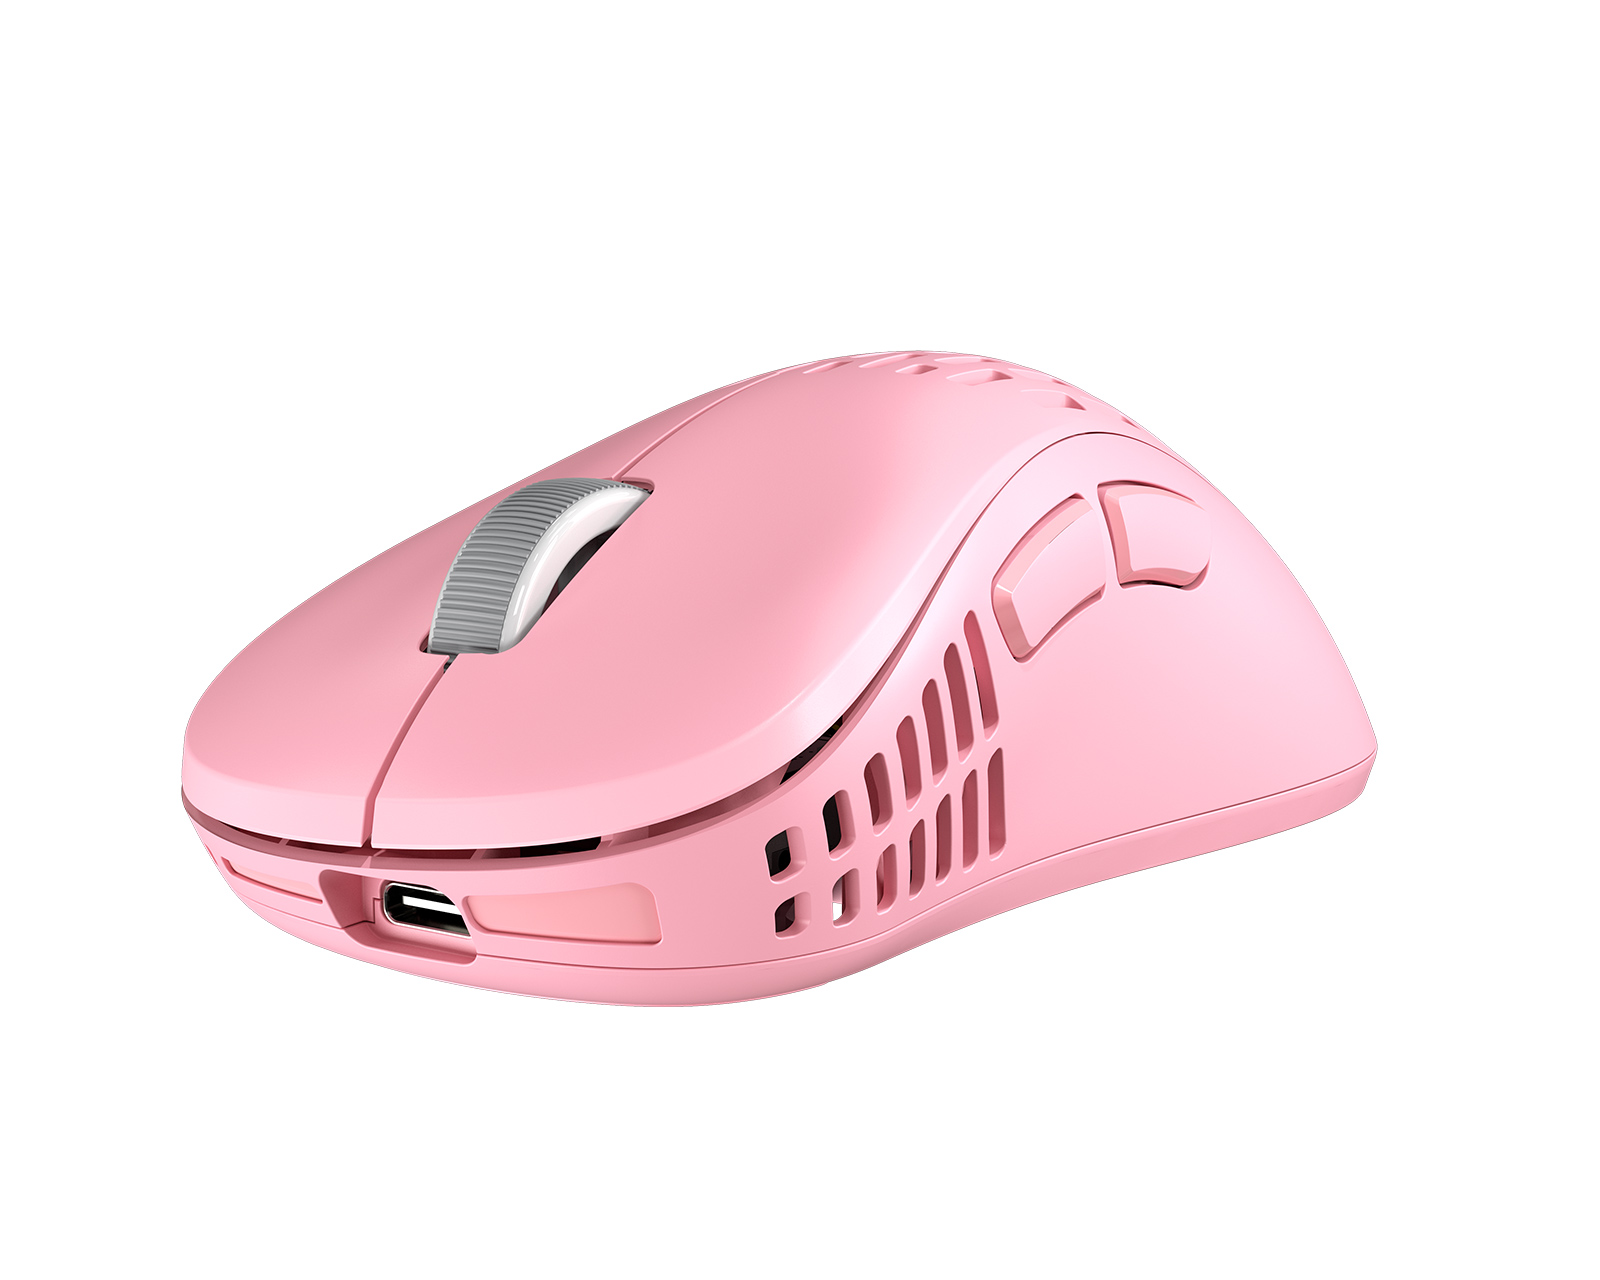 Pulsar Xlite Wireless v2 Competition Gaming Mouse - Pink - us 